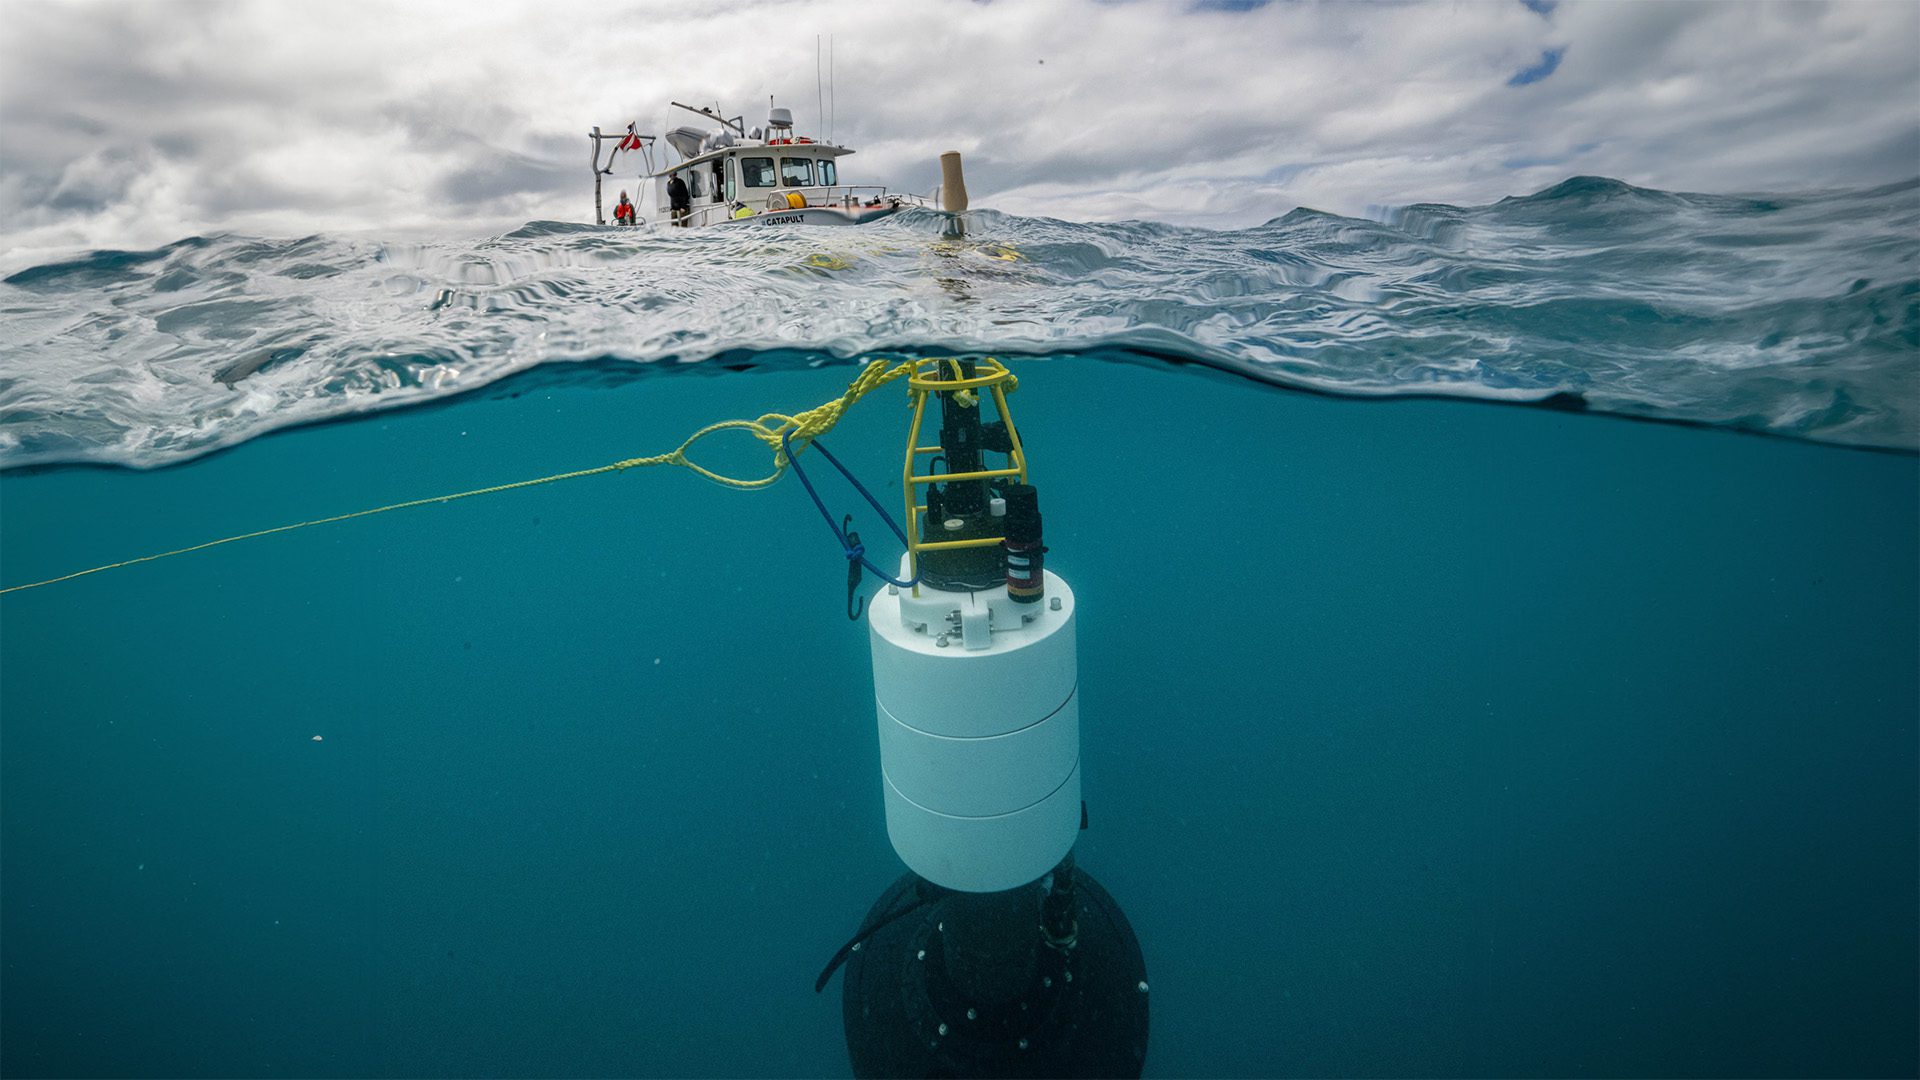 TZEX, the Twilight Zone Explorer, is deployed in the ocean to gather data about marine snow, biological particles that float through the water column, and serve the important role of transporting carbon from surface waters to the deep sea. (Photo by Evan Kovacs, © Woods Hole Oceanographic Institution)